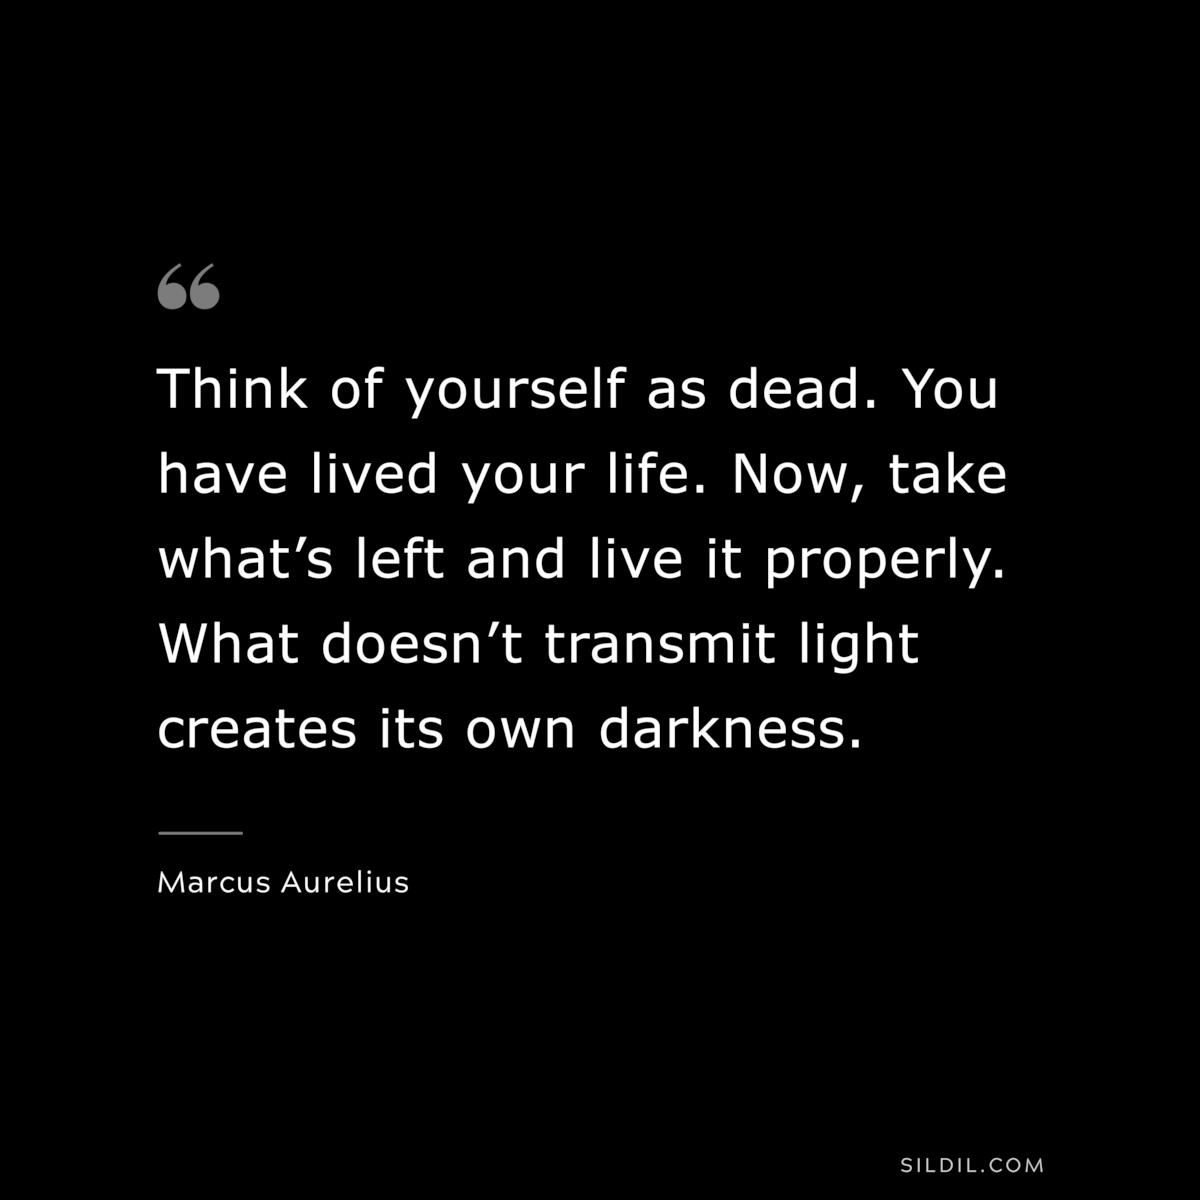 Think of yourself as dead. You have lived your life. Now, take what’s left and live it properly. What doesn’t transmit light creates its own darkness. ― Marcus Aurelius